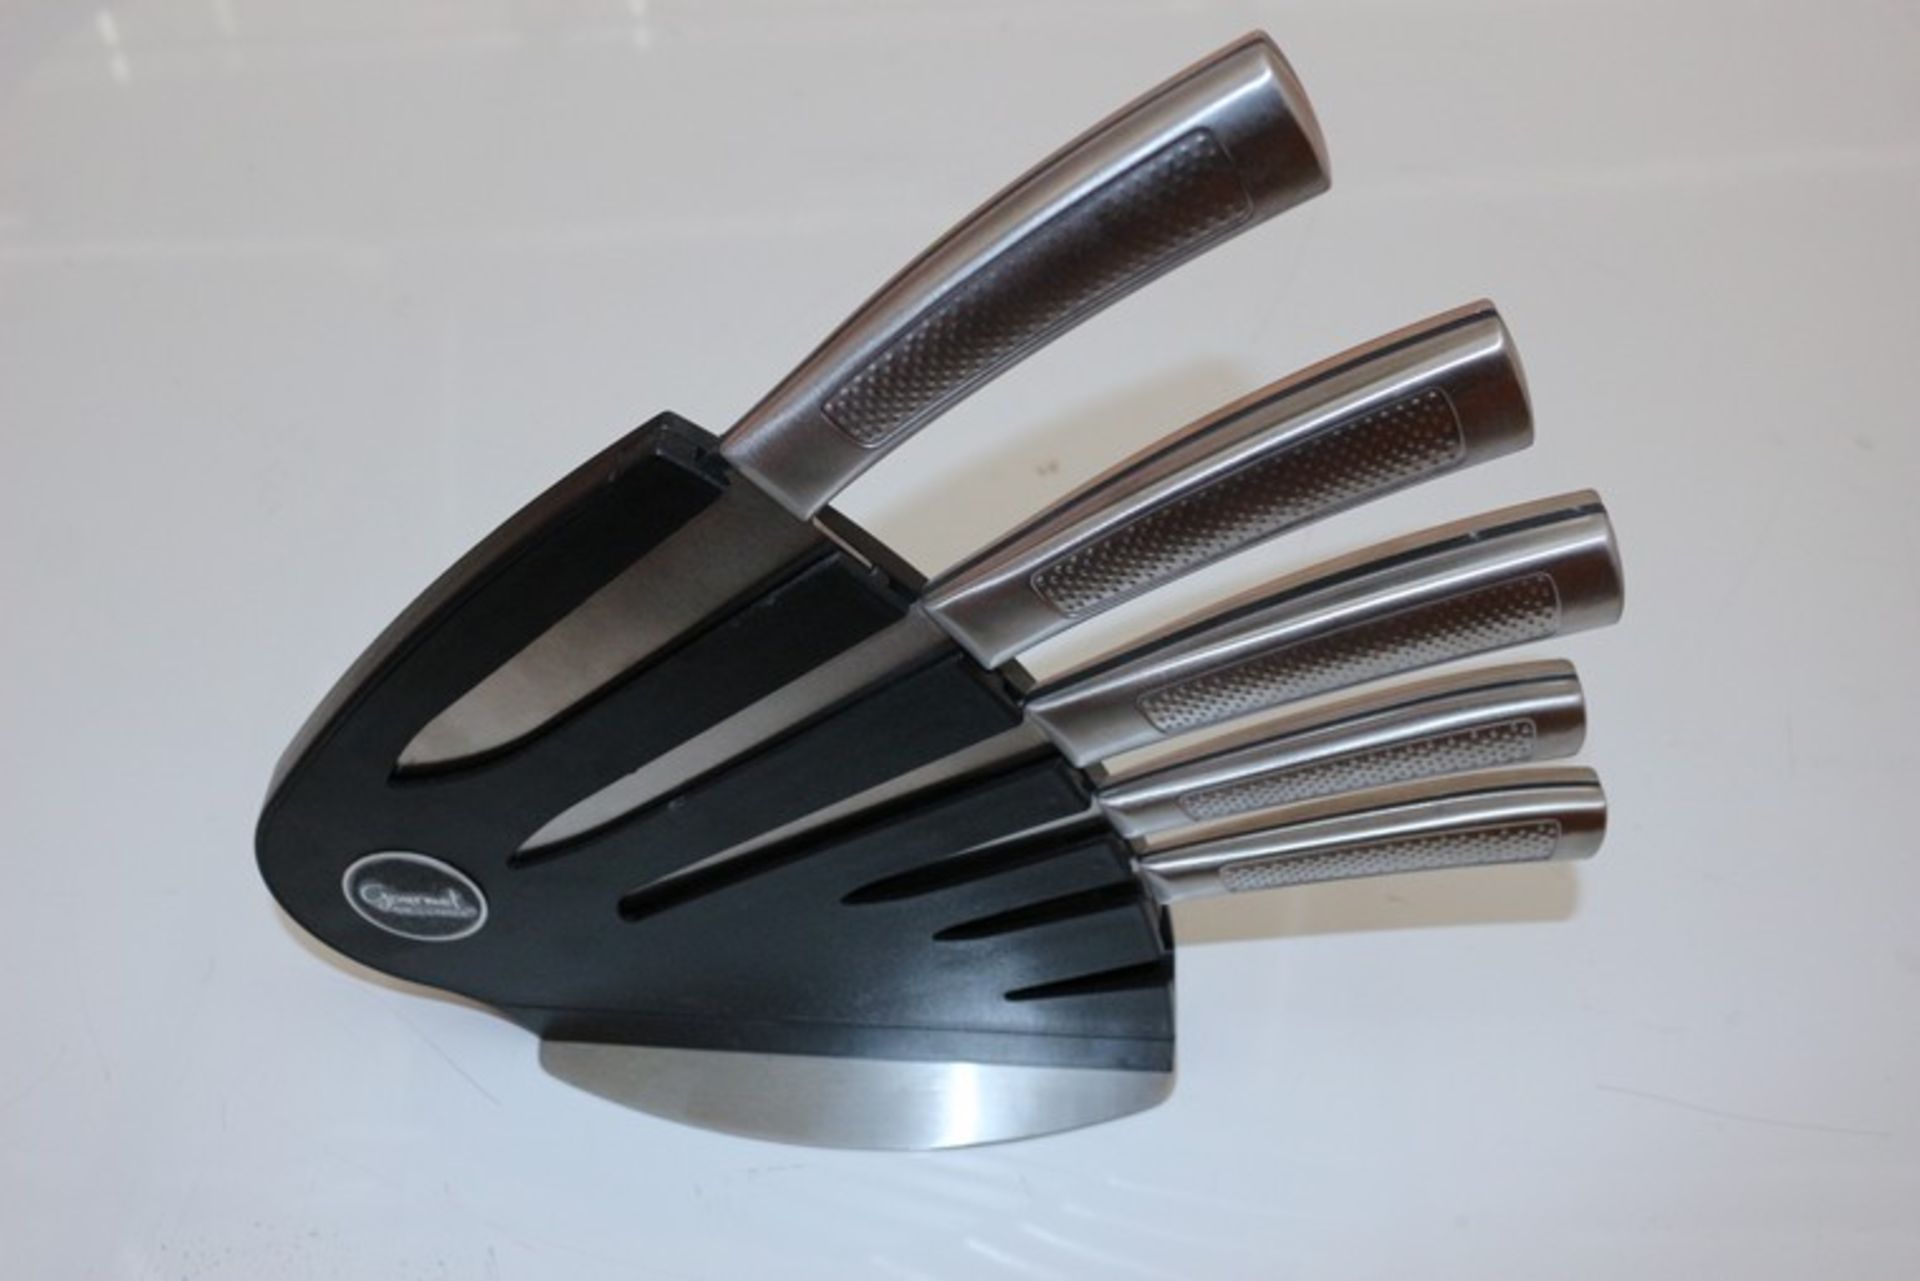 2 x BOXED BRAND NEW GOURMET BY KEENOX 7 PIECE KNIFE BLOCK AND KNIFE SETS *PLEASE NOTE THAT THE BID